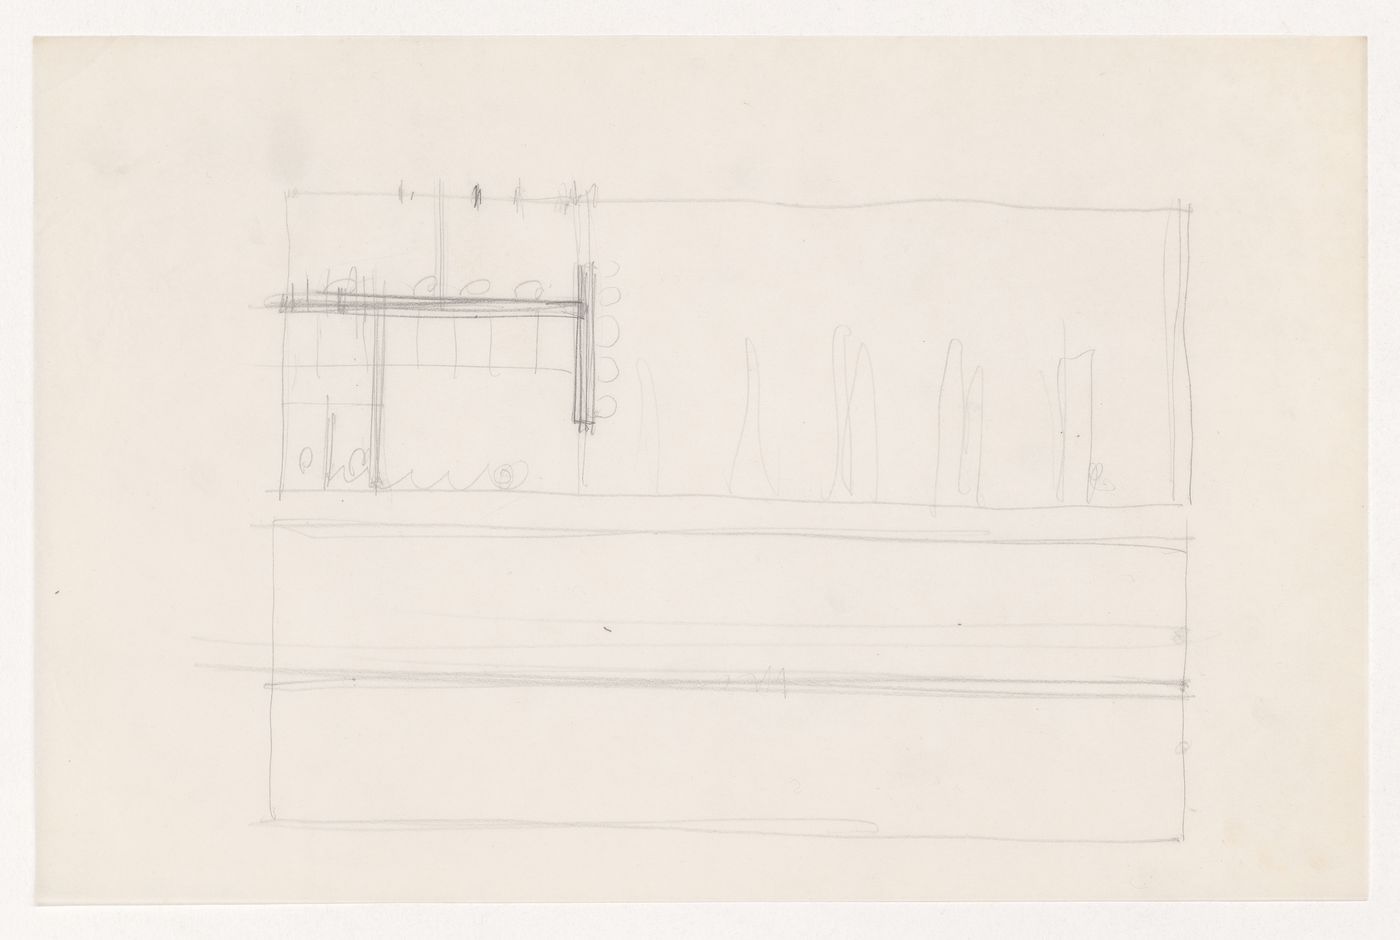 Sketch plans for the Gymnasium